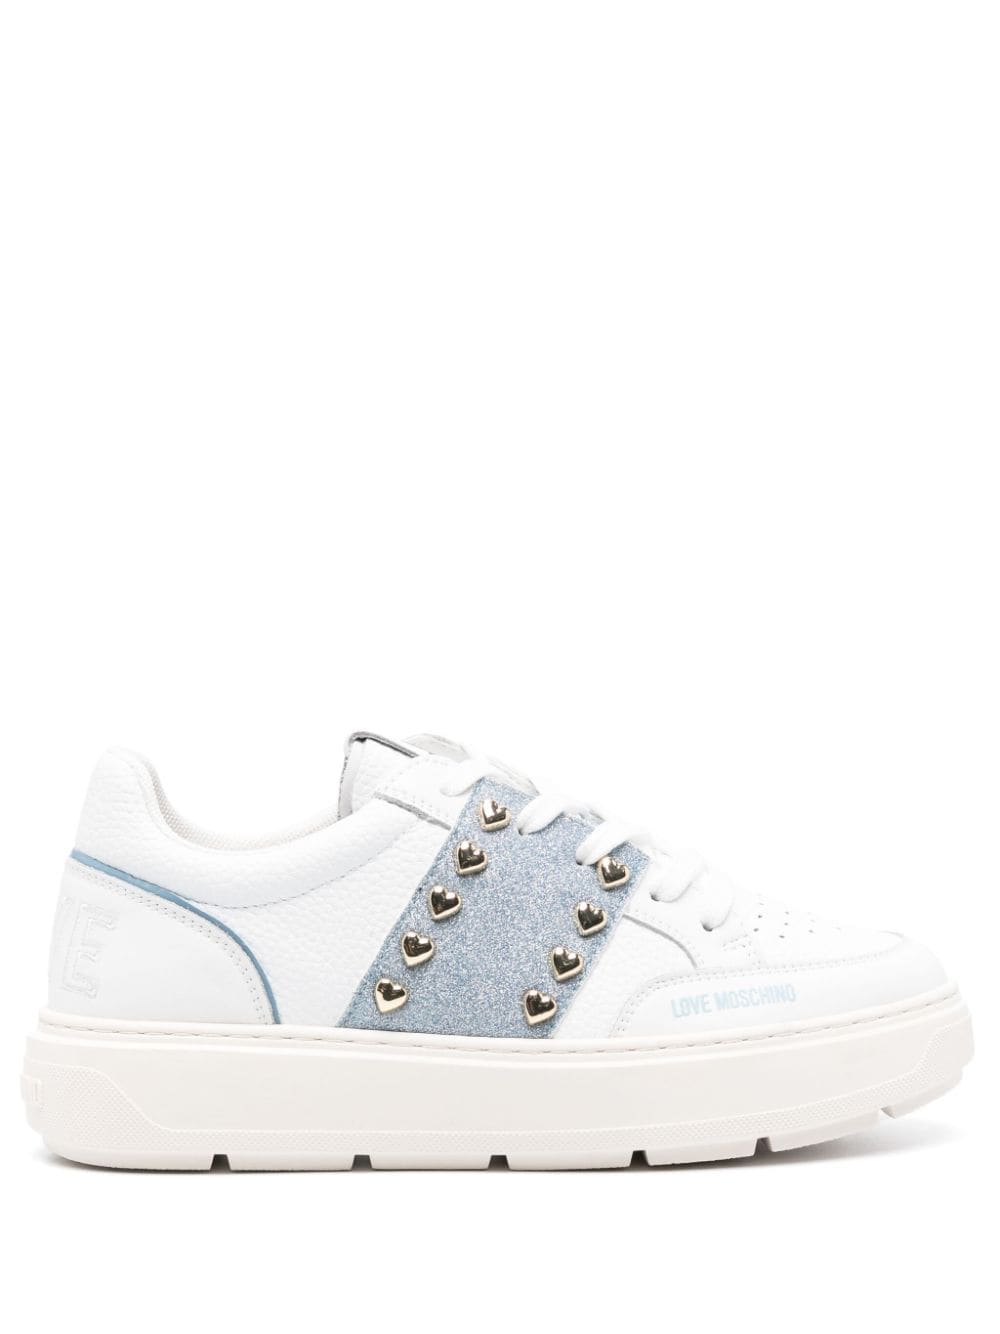 Love Moschino leather lace-up sneakers - White von Love Moschino